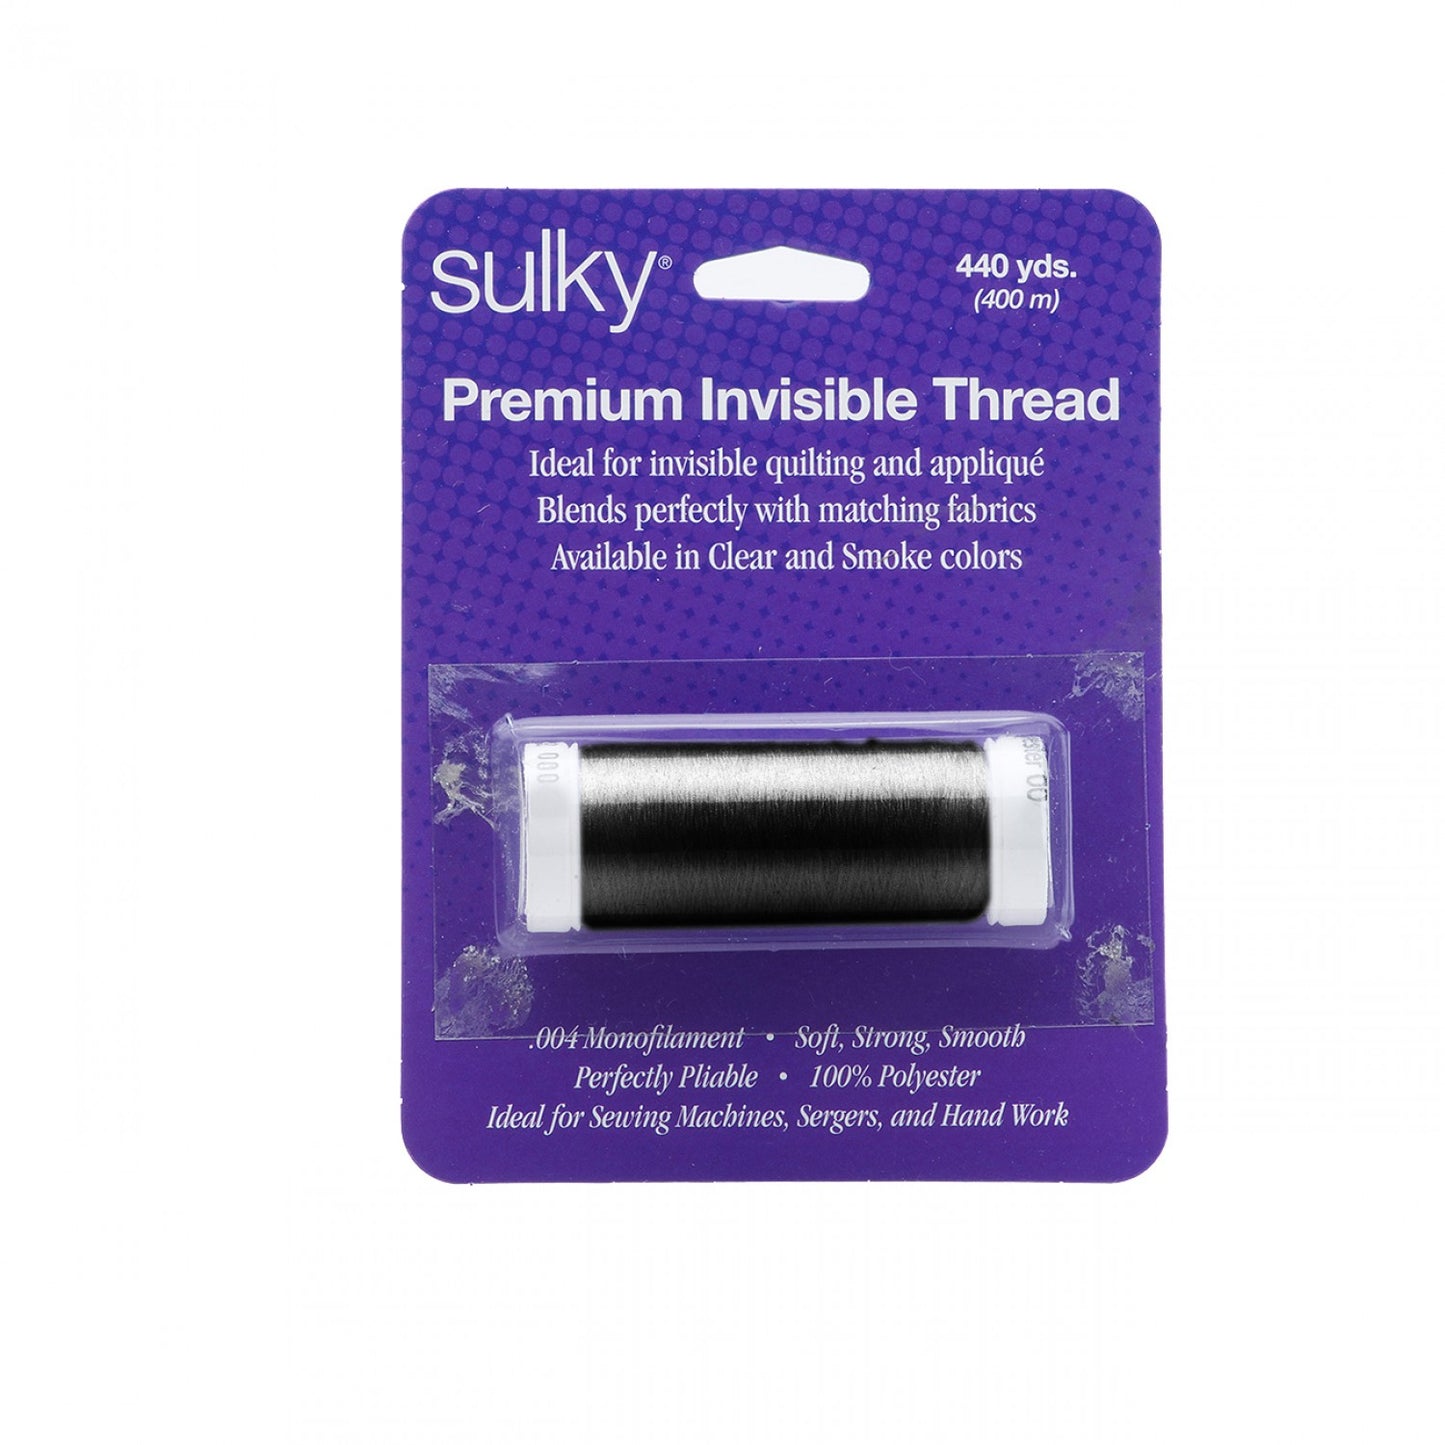 Sulky Invisible Polyester Thread .004mm 440yds Smoke Carded